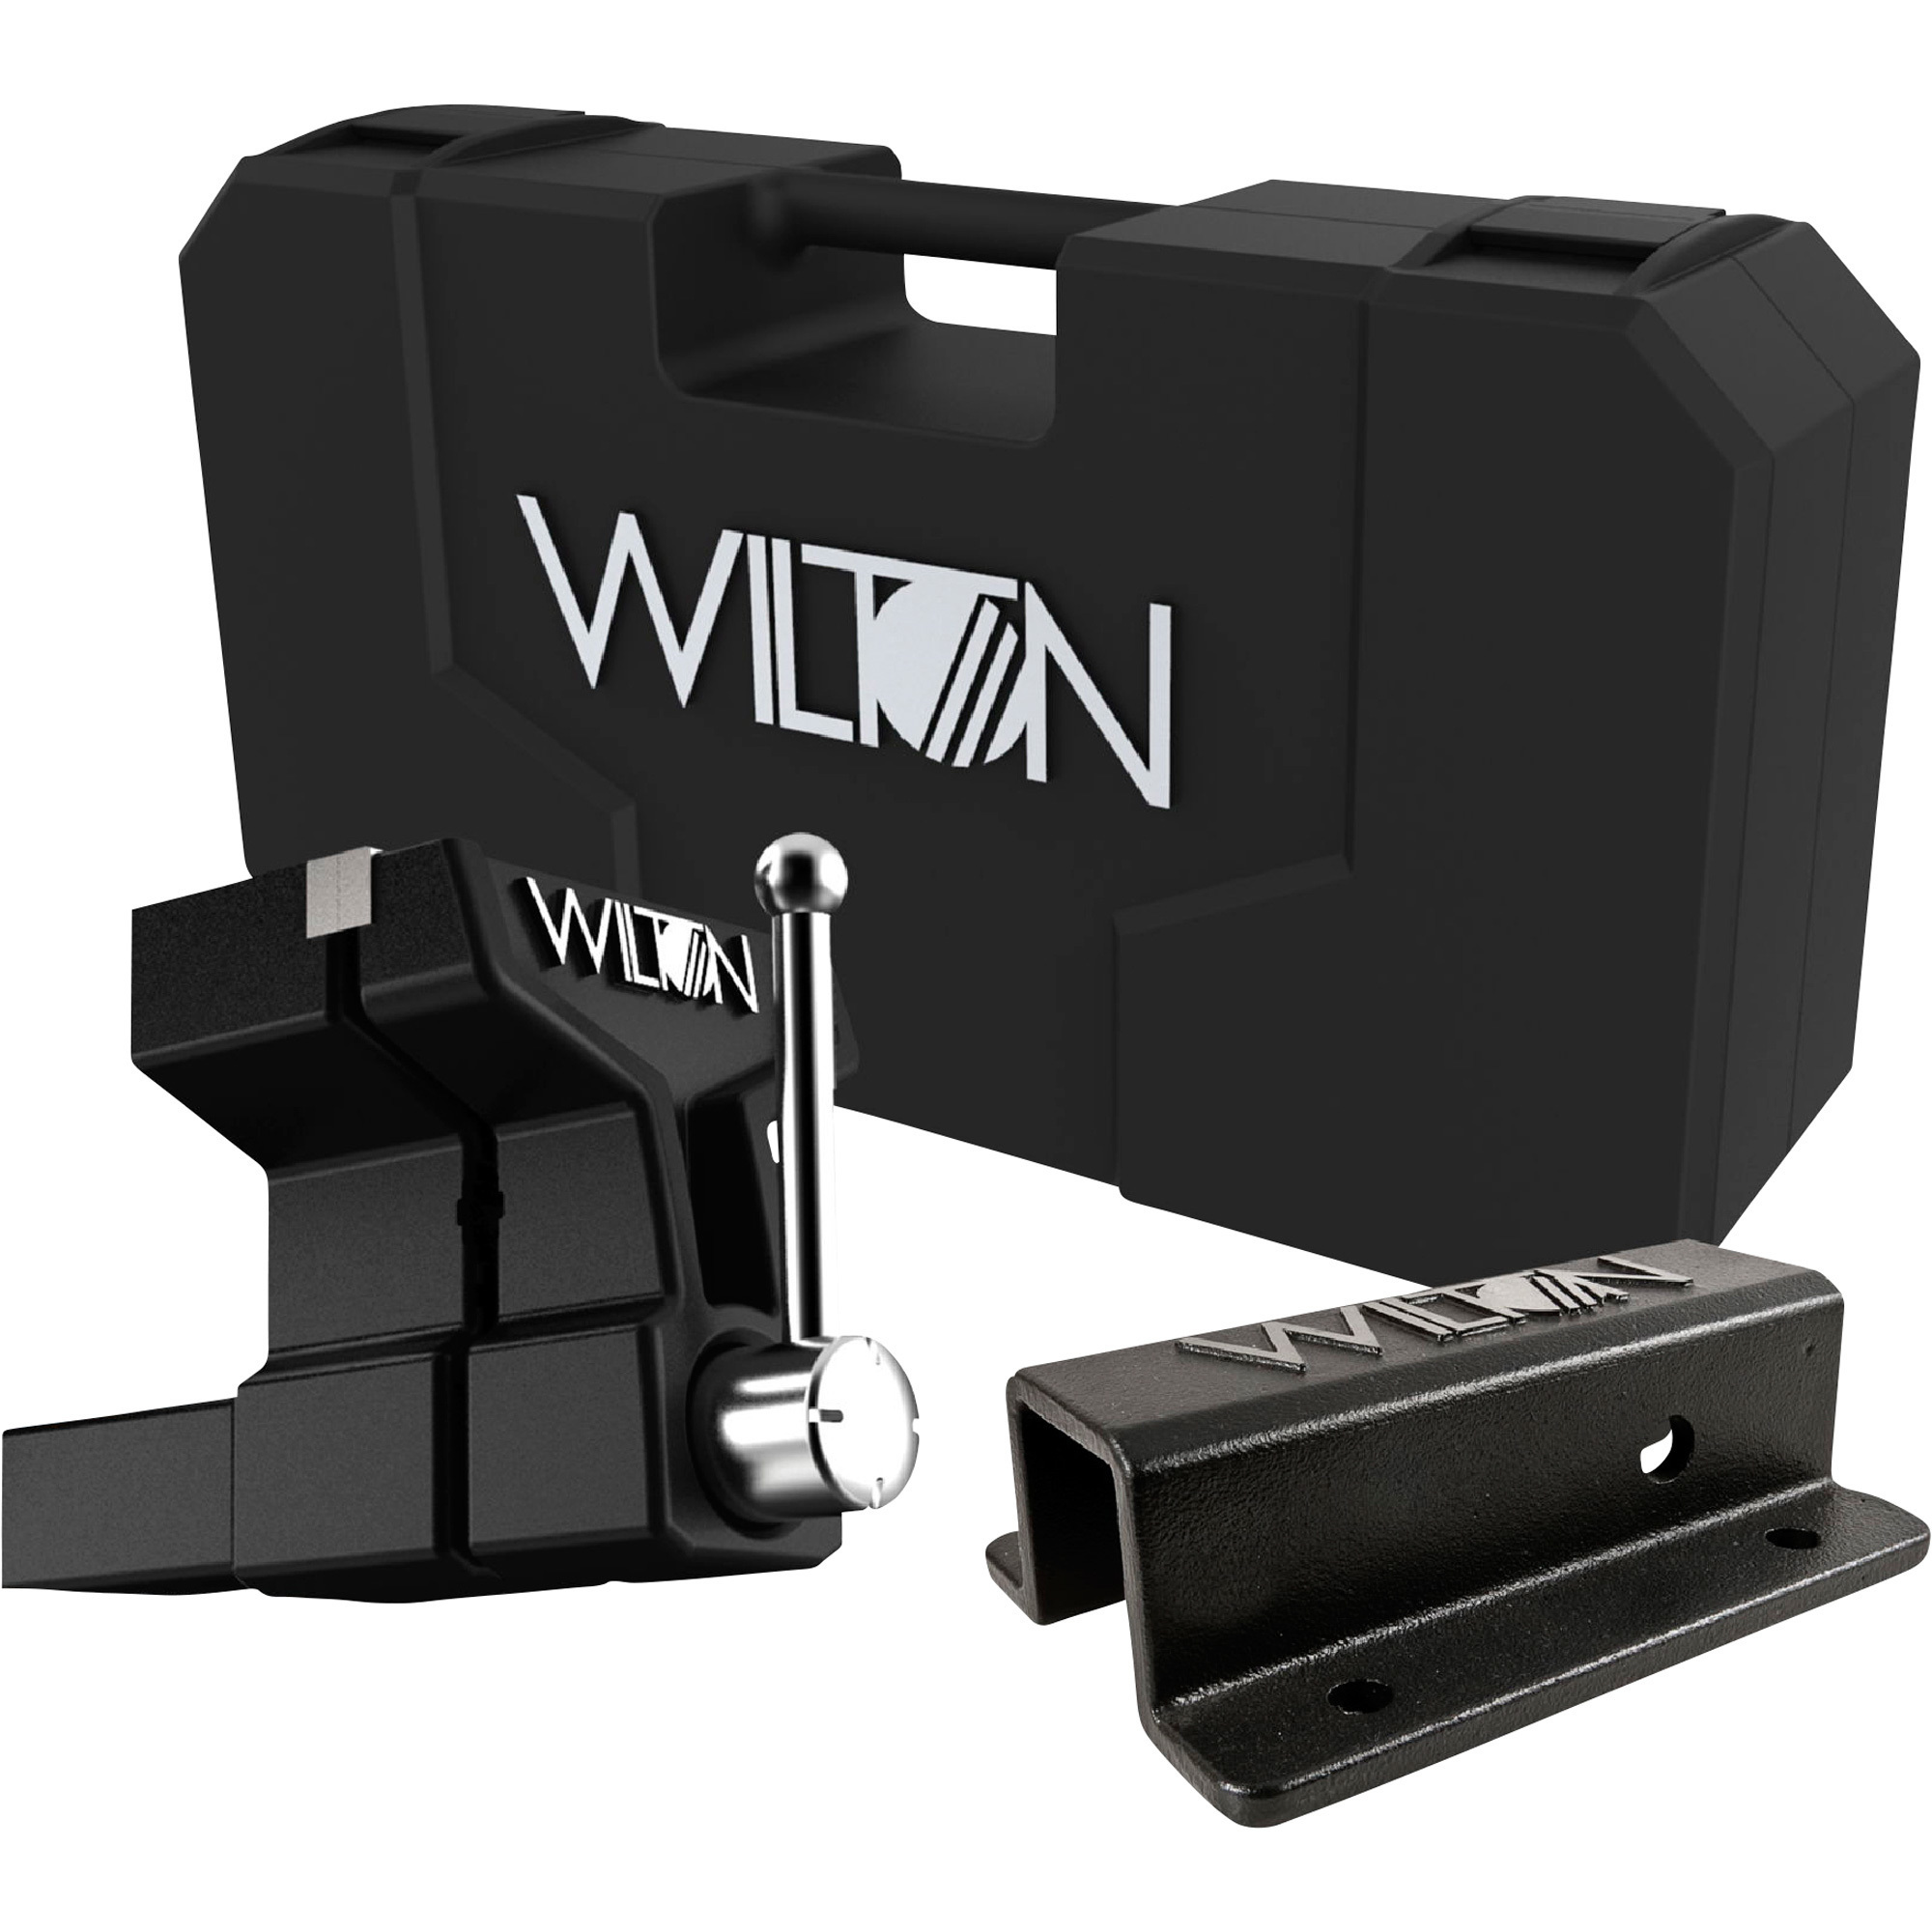 Wilton ATV All-Terrain Hitch Vise with Case, 6Inch Jaw Width, Model 10015